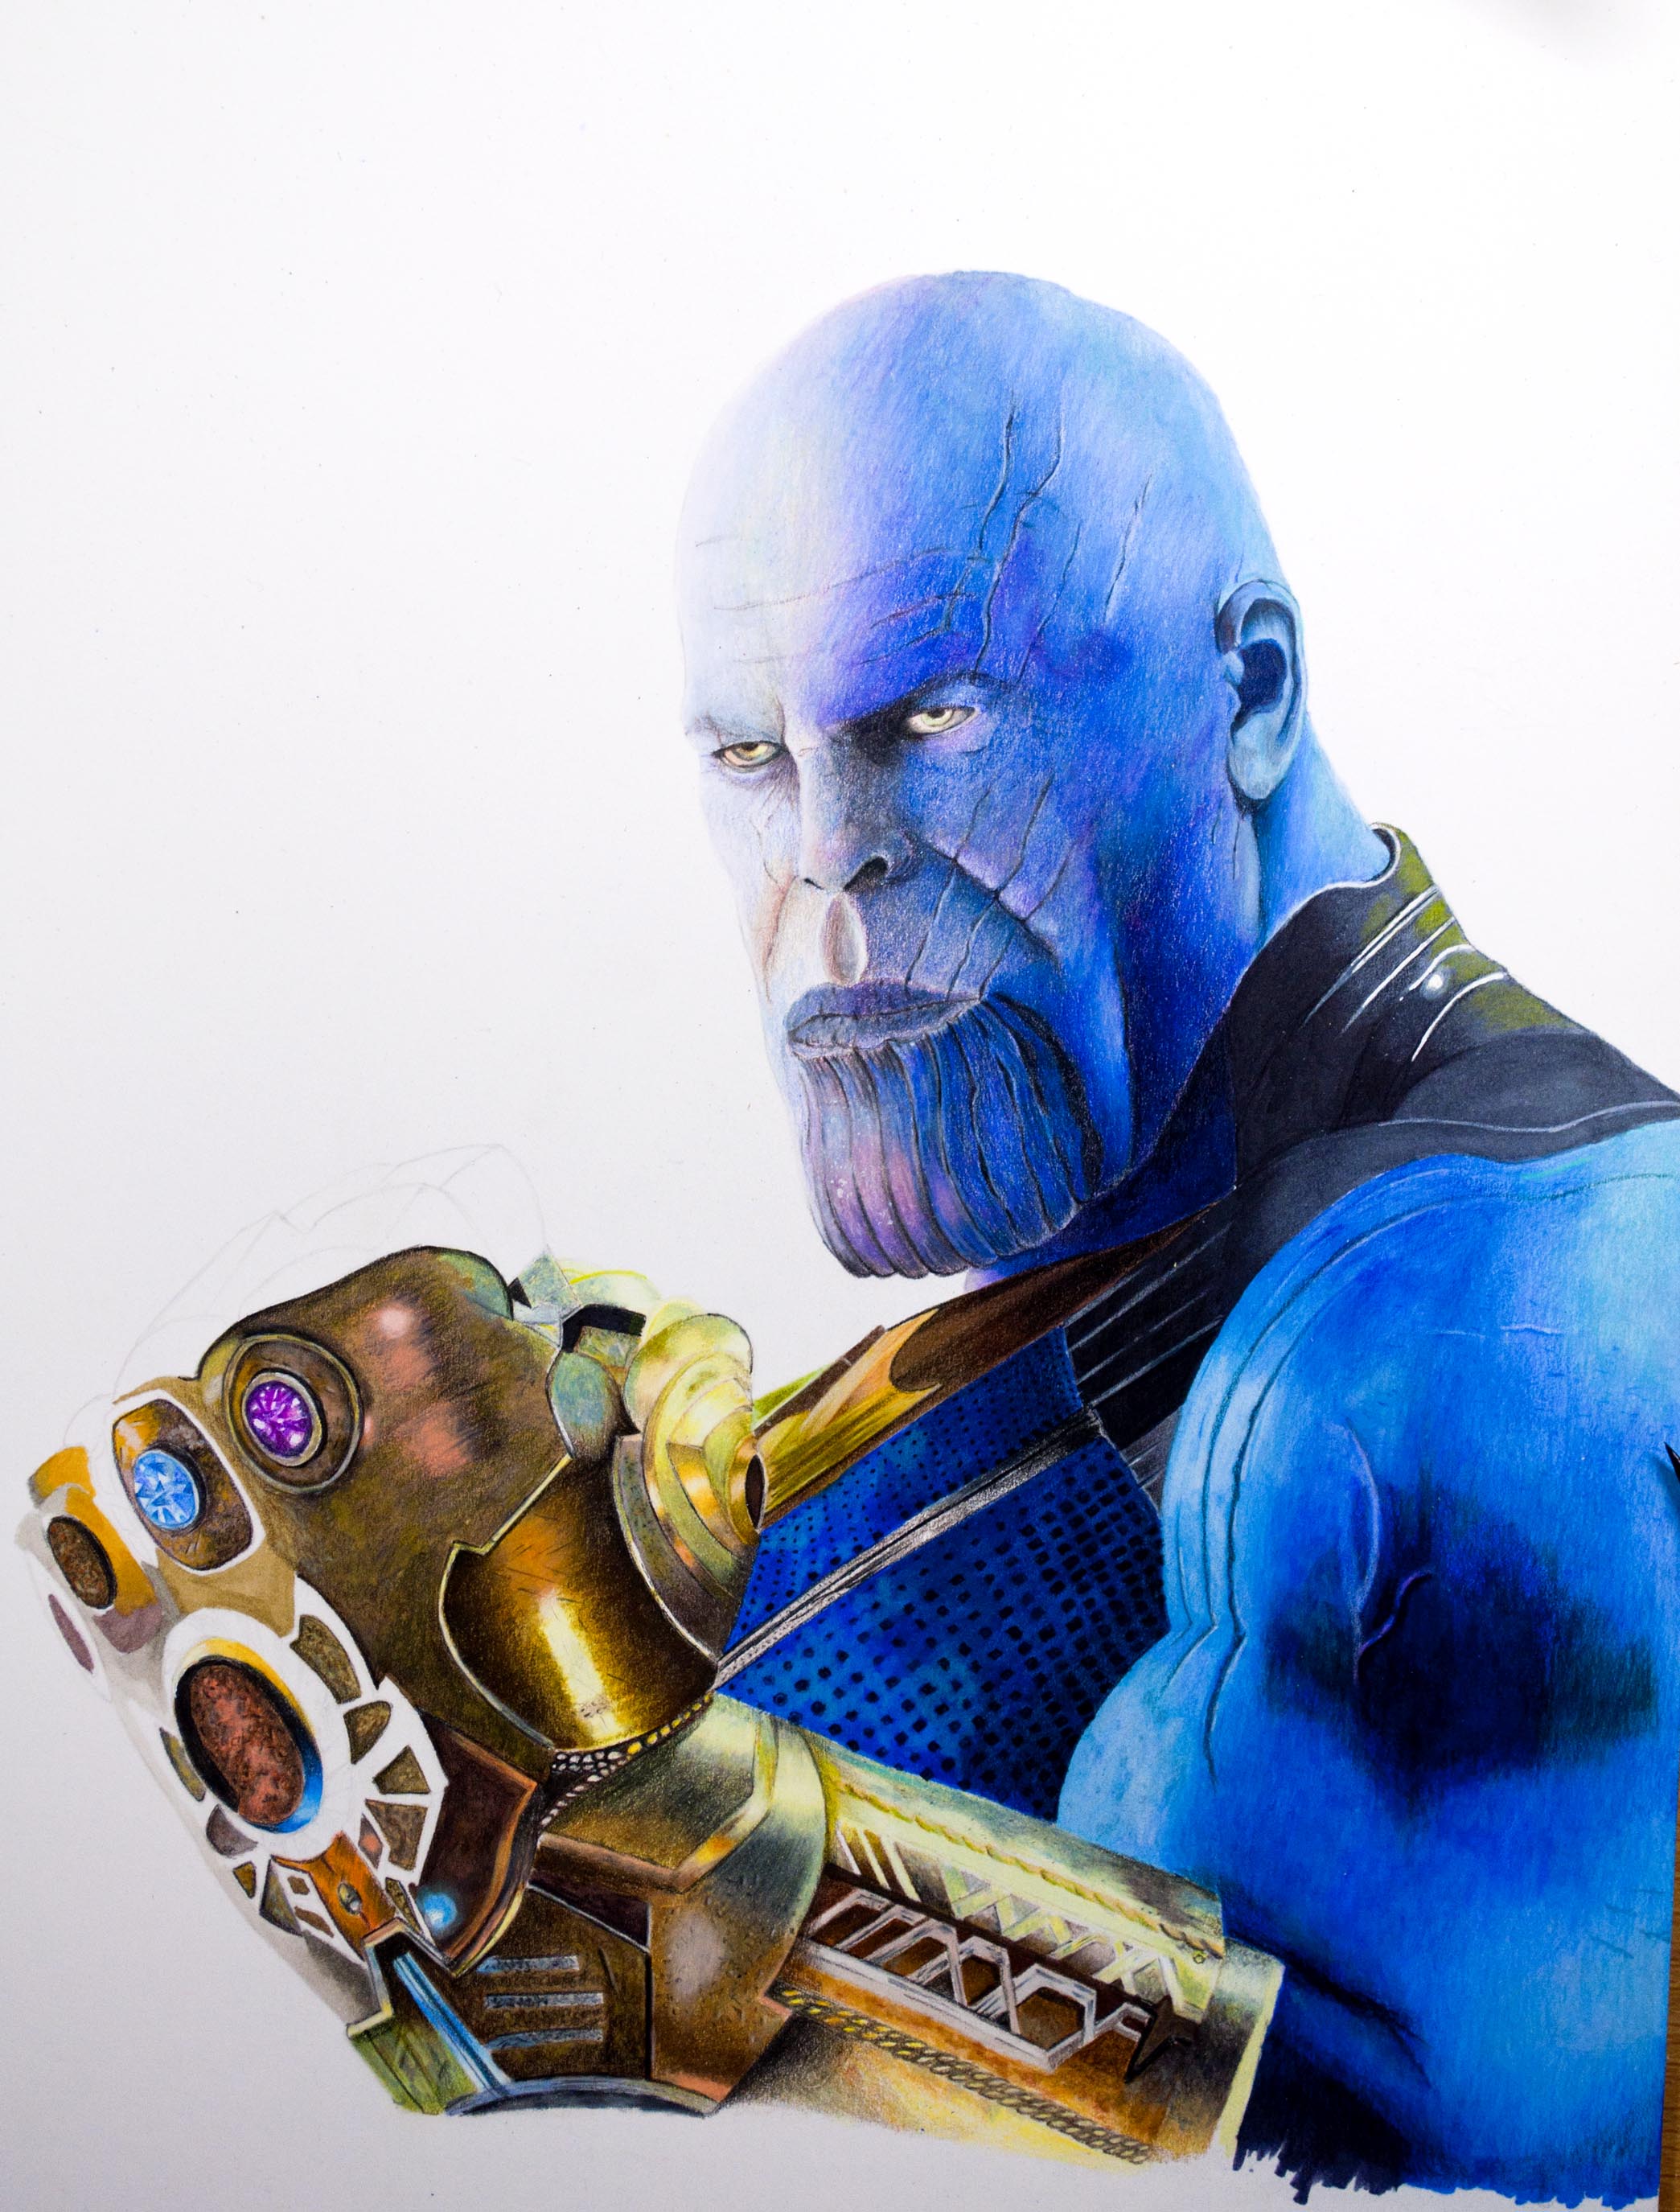 Drawing Thanos From Avengers  Endgame  Pencil Sketch Drawing Thanos   Avengers Infiniy War  YouTube